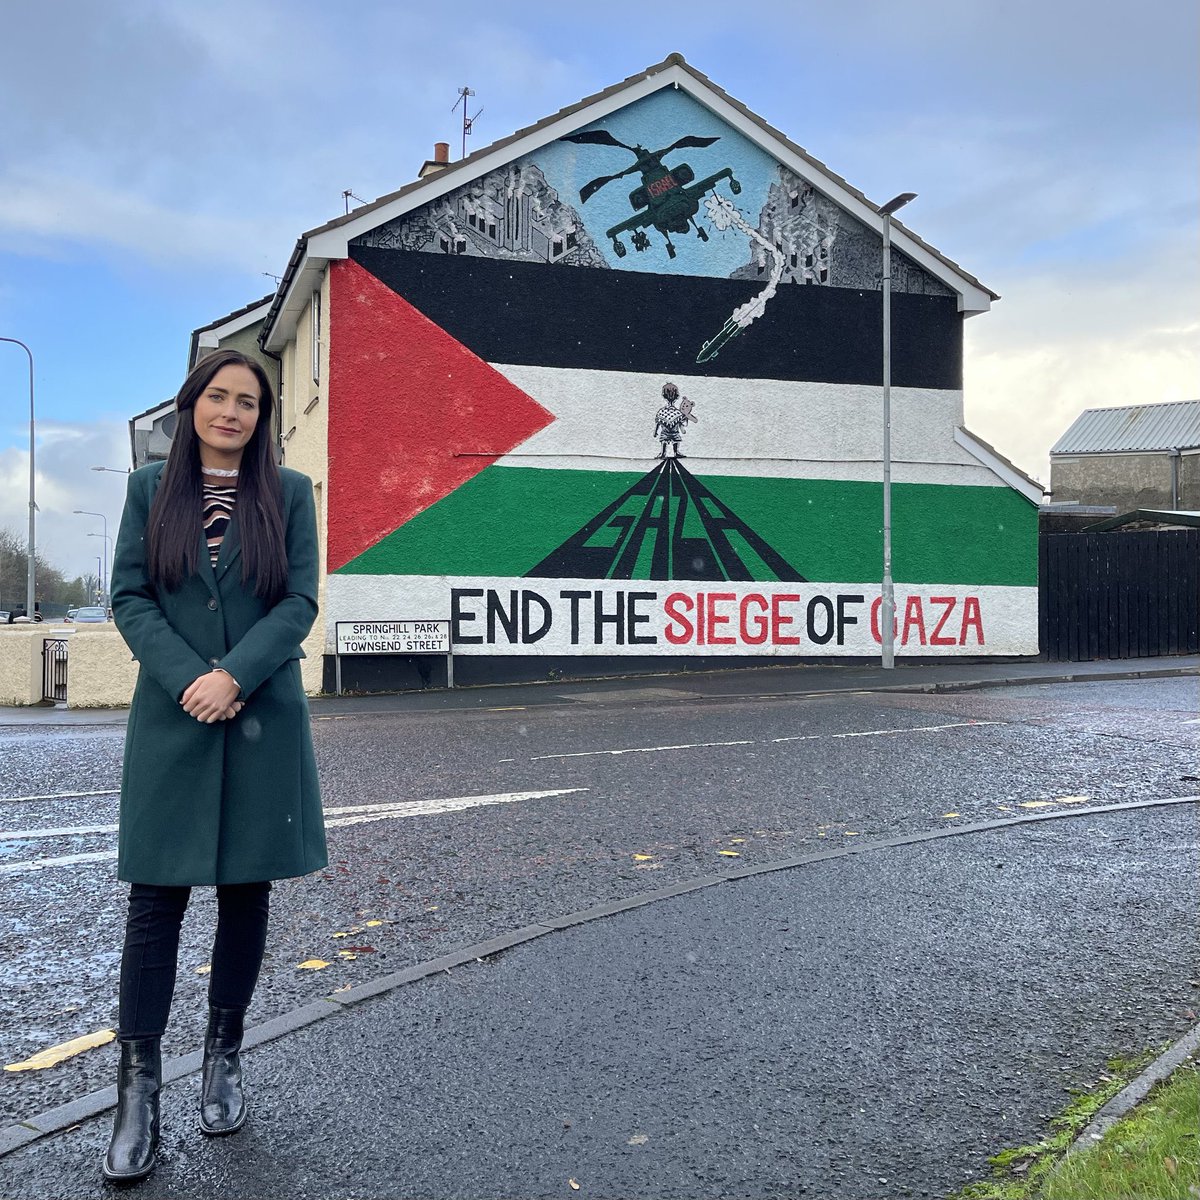 Today marks 76 years since the Nakba, when 750,000 Palestinians were driven out of their homes. It is ongoing today. Ireland will always stand with Palestine. End the occupation. Free Palestine.